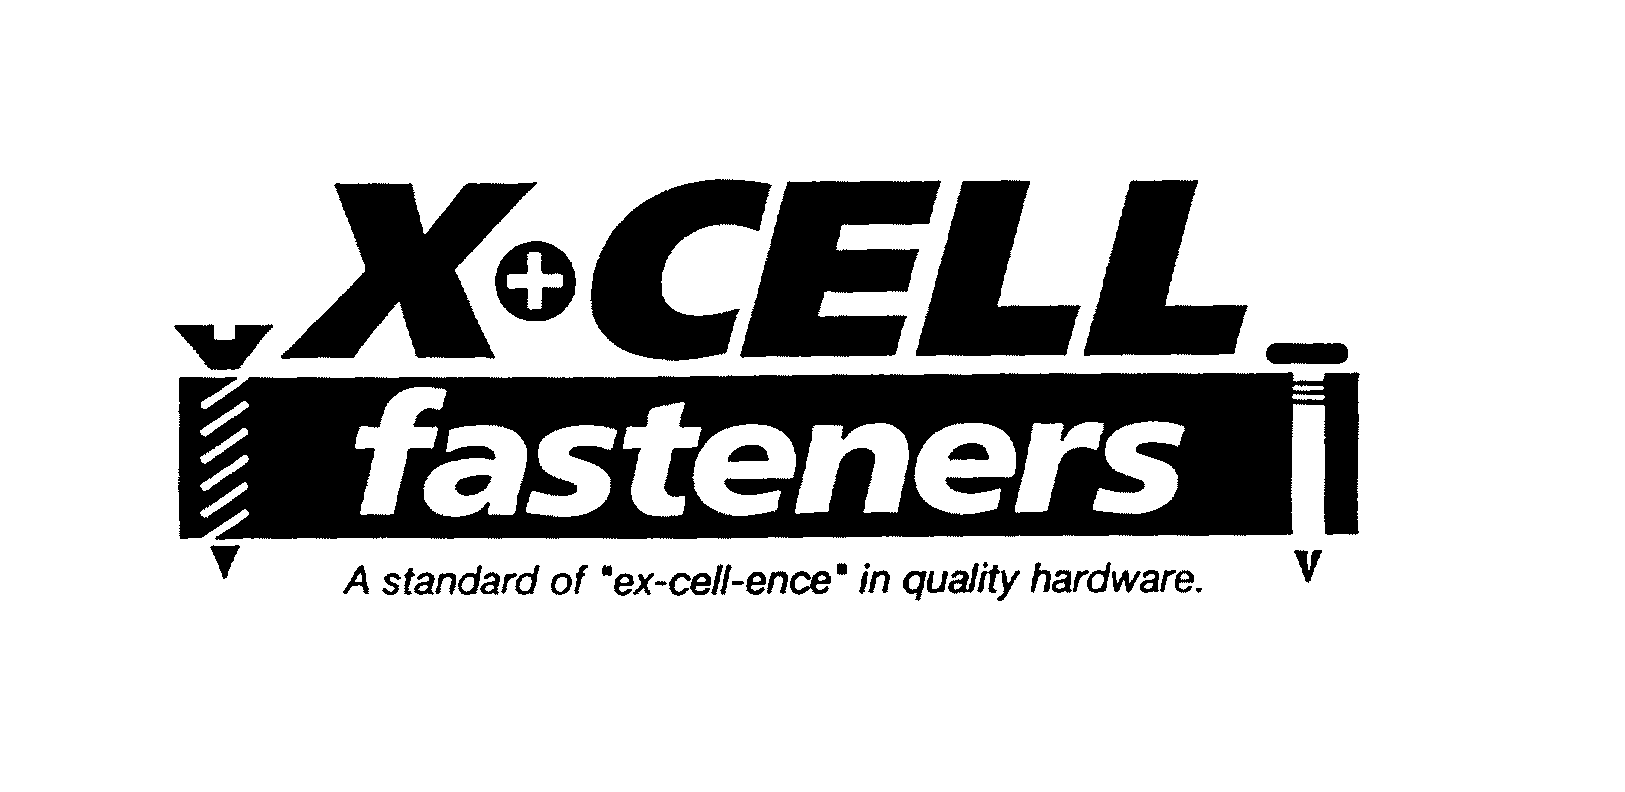  X+CELL FASTNERS A STANDARD OF &quot;EX-CELL-ENCE&quot; IN QUALITY HARDWARE.